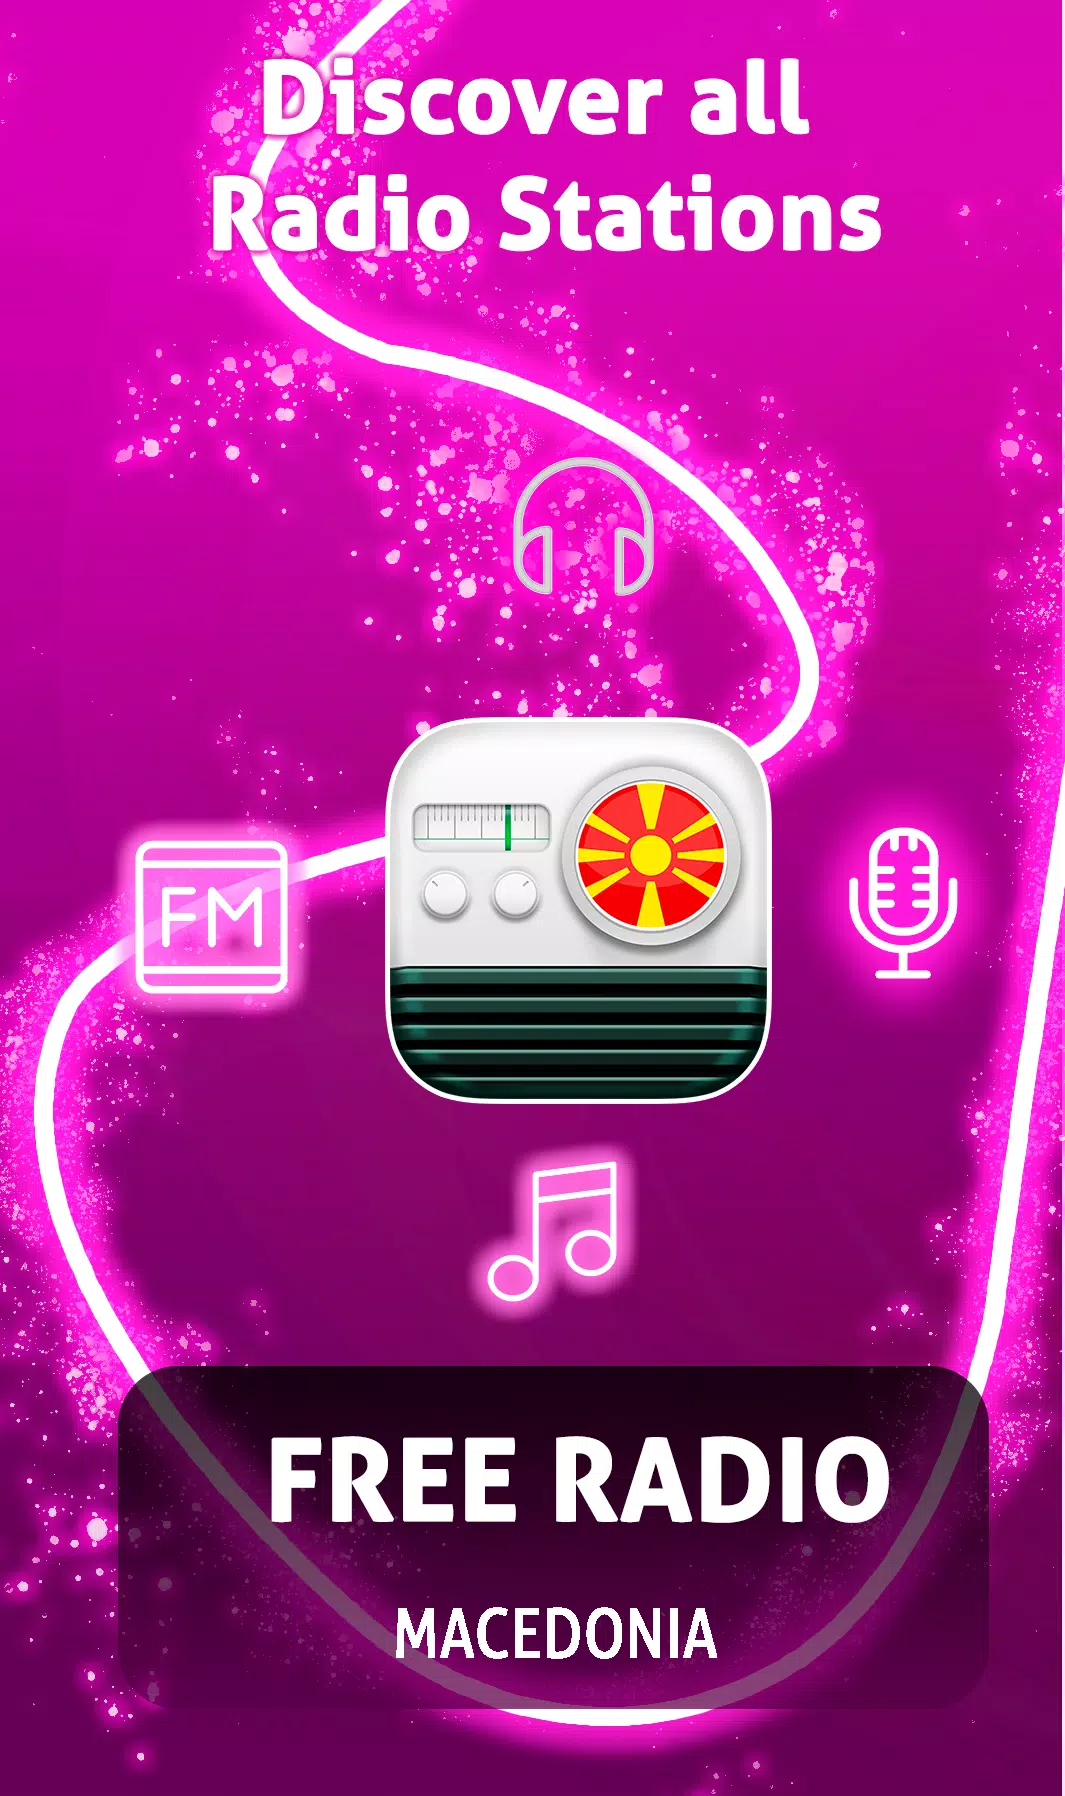 Radio Macedonia for Android - APK Download